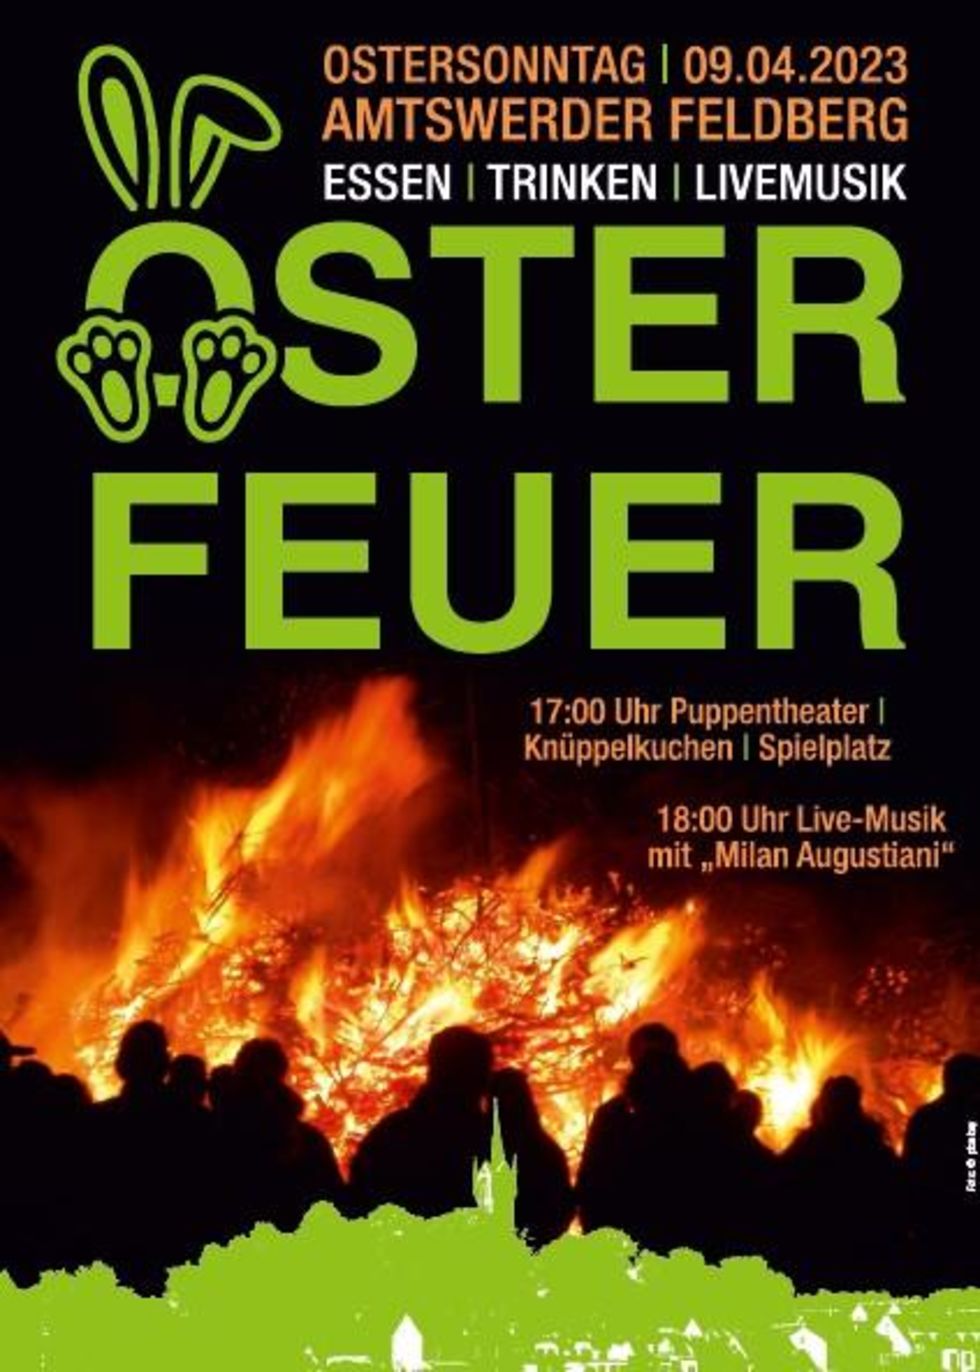 Osterfeuer 